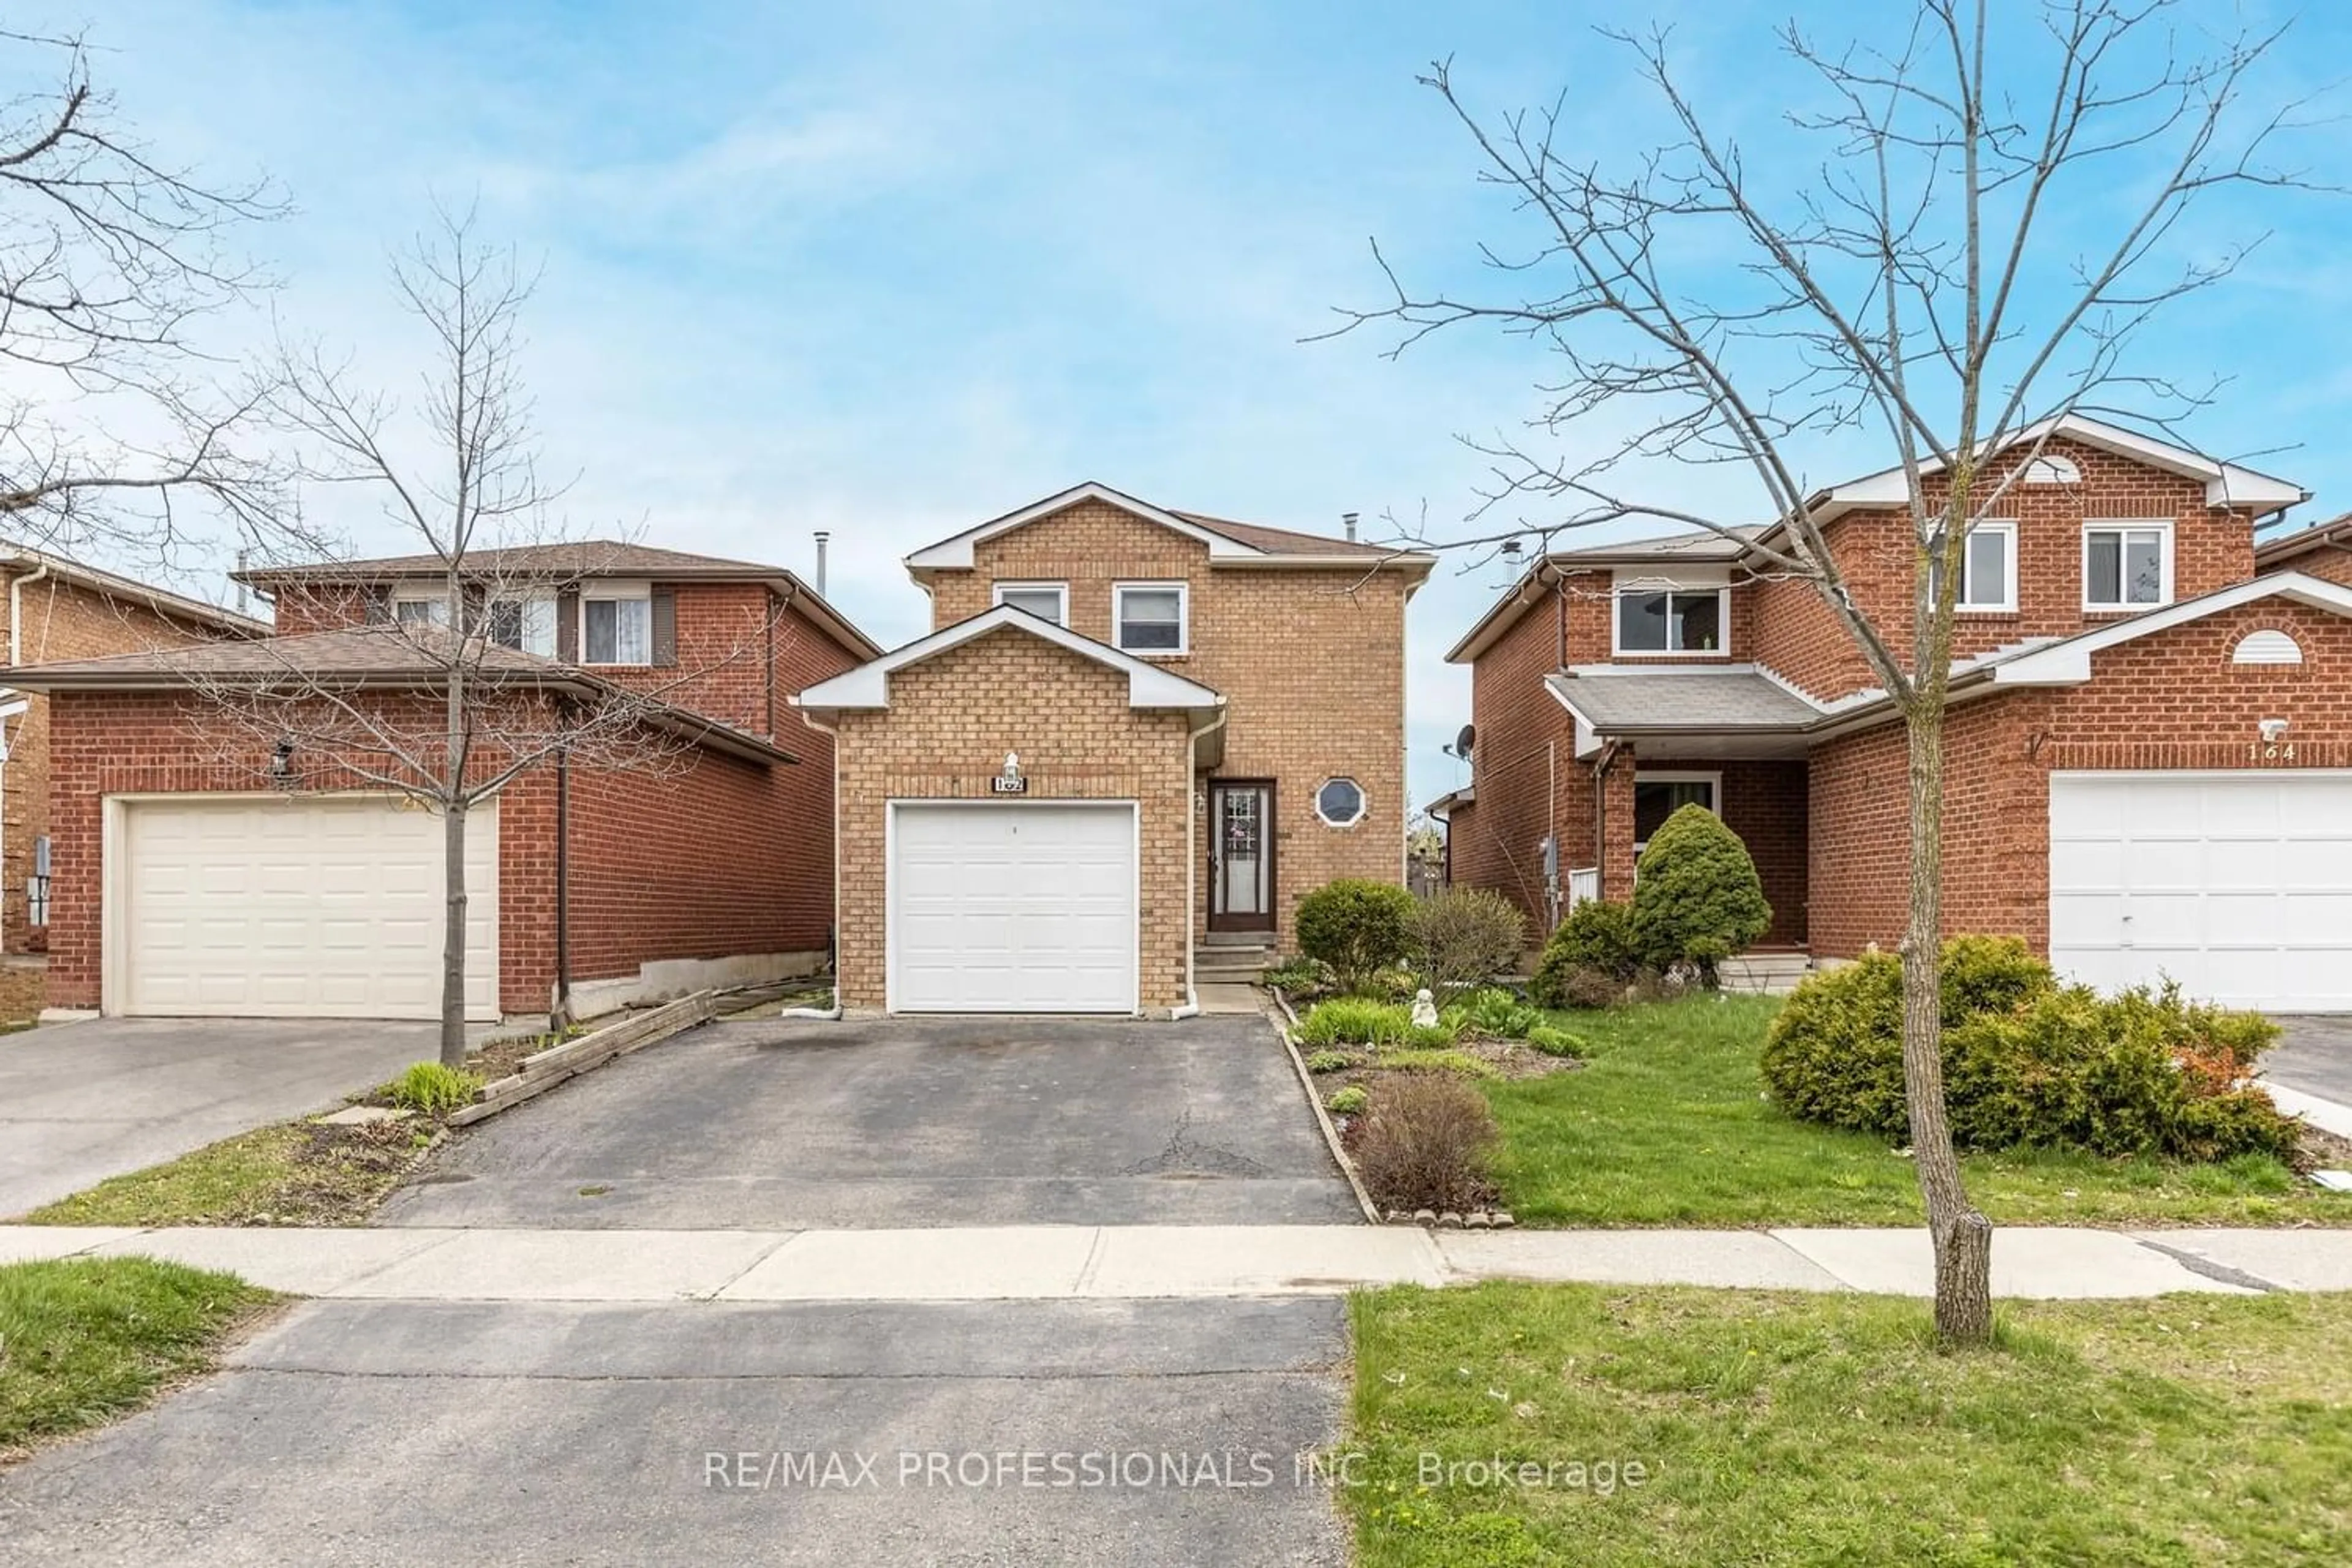 Frontside or backside of a home for 162 Ecclestone Dr, Brampton Ontario L6X 3P6